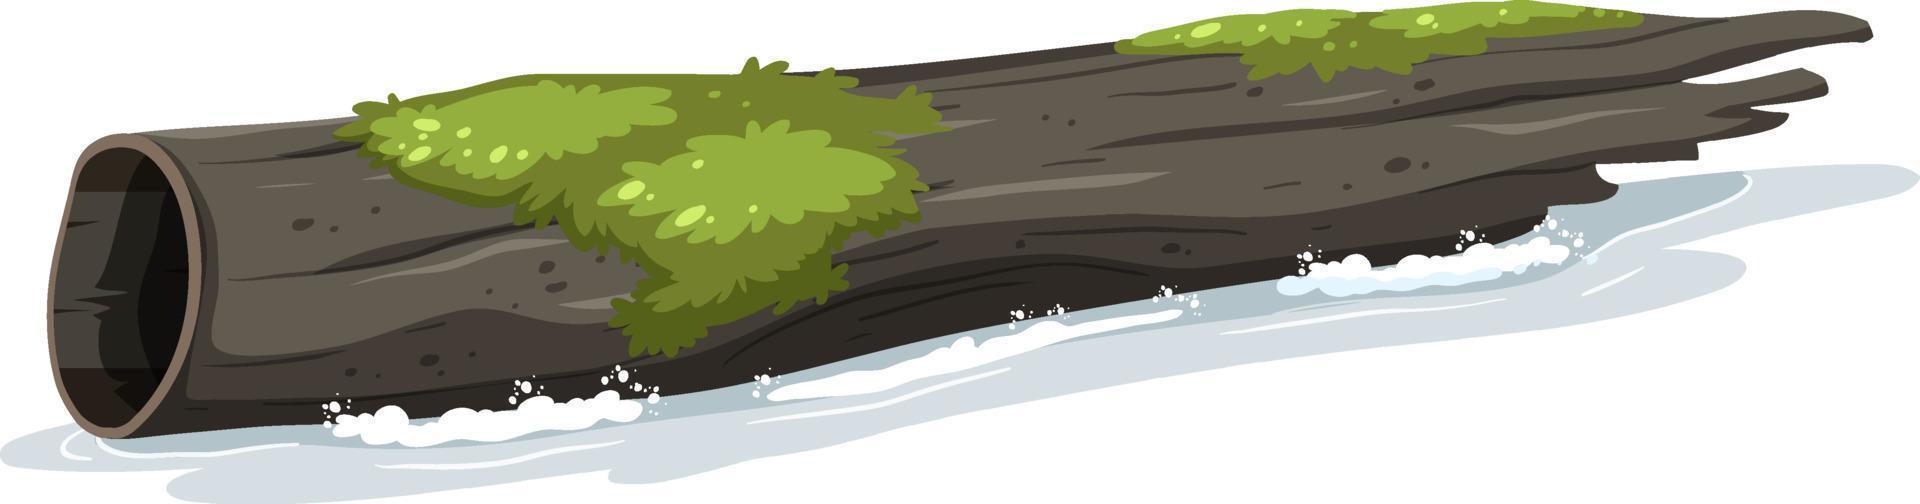 Isolated floating dead log wood vector